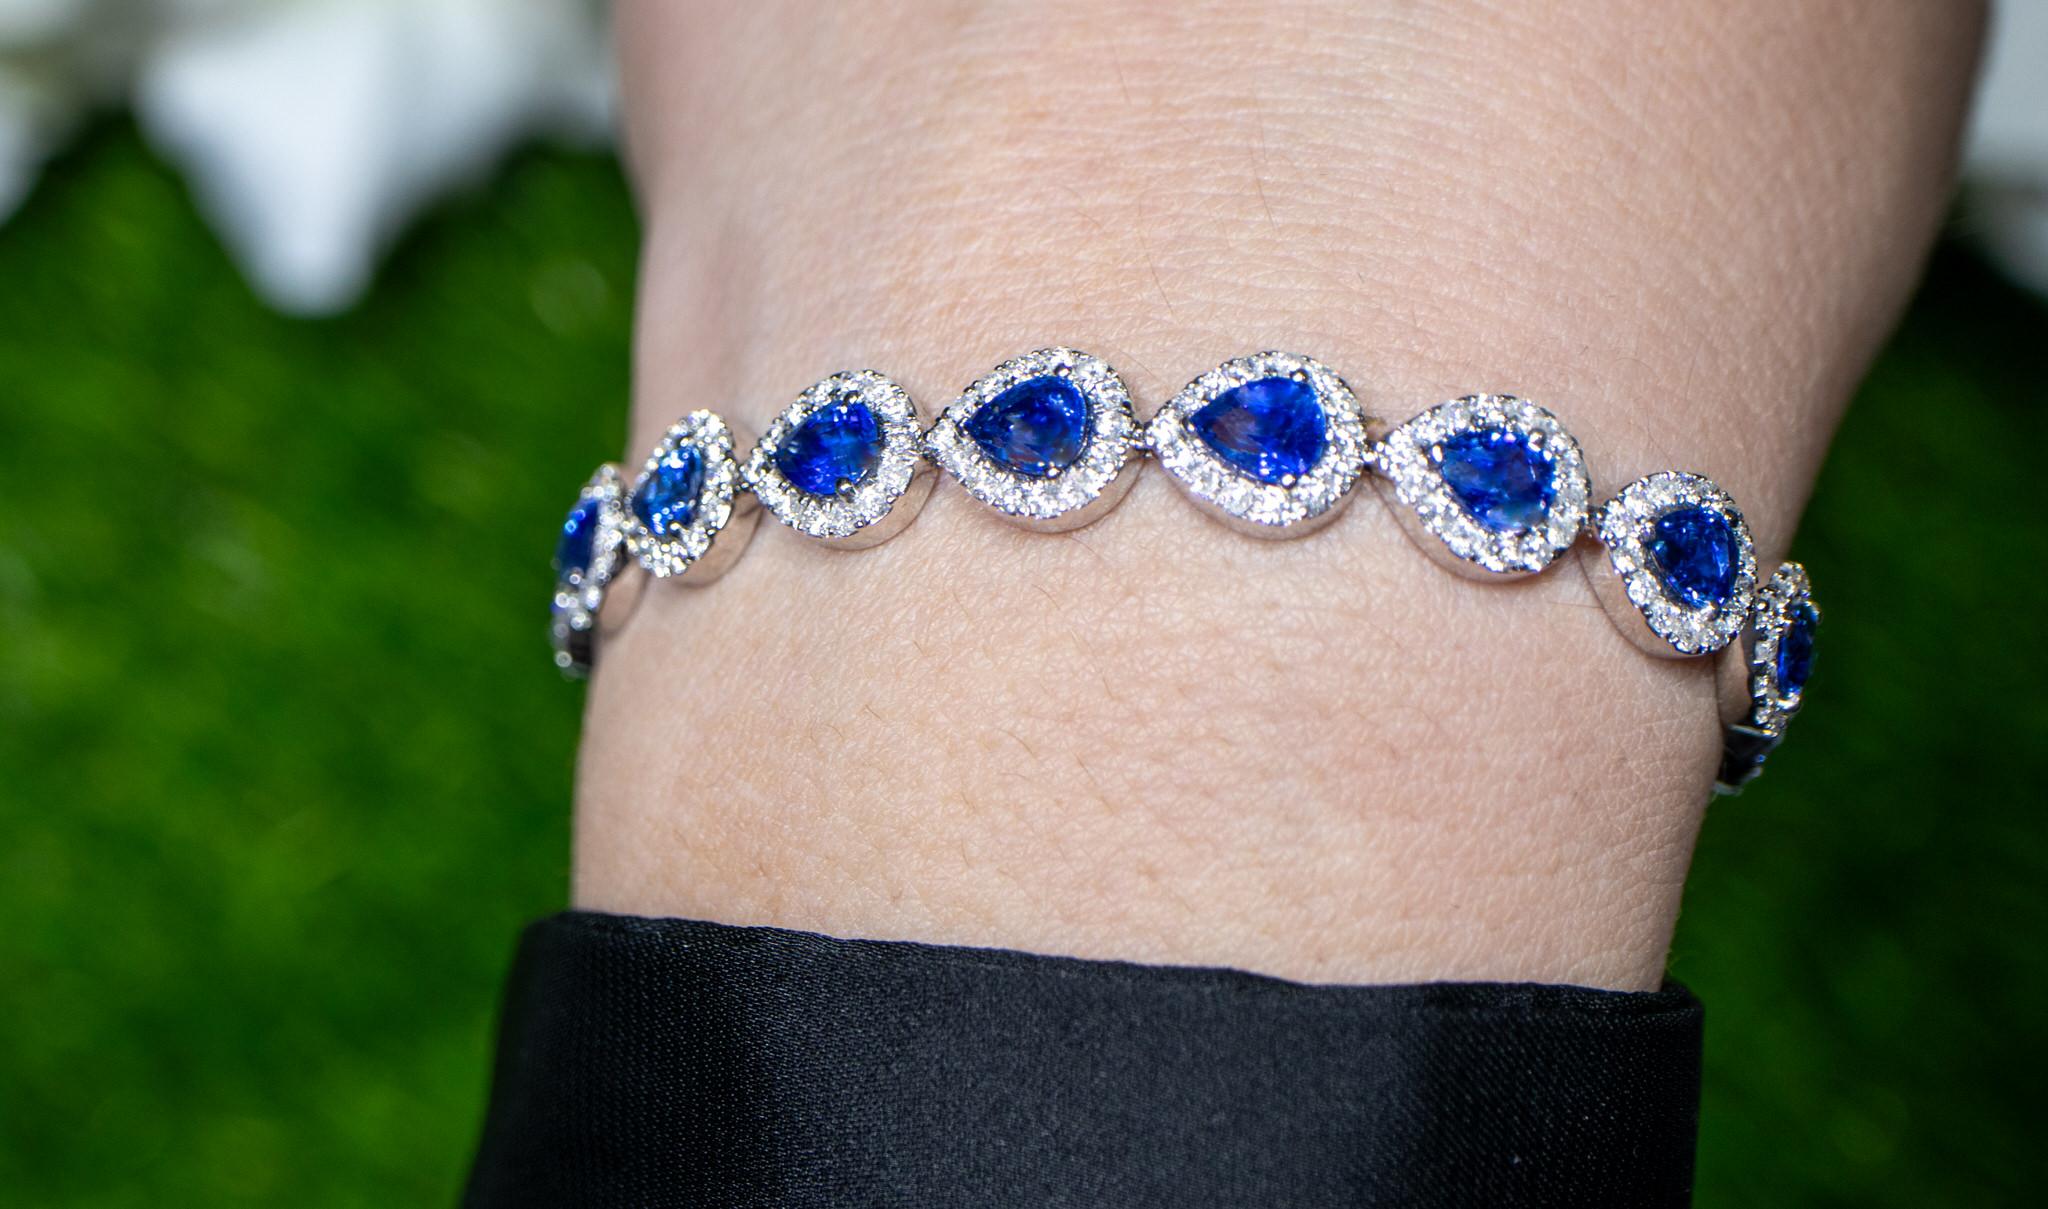 Blue Pear Cut Sapphire Bracelet Diamond Halo 13.6 Carats 18K Gold In Excellent Condition For Sale In Laguna Niguel, CA